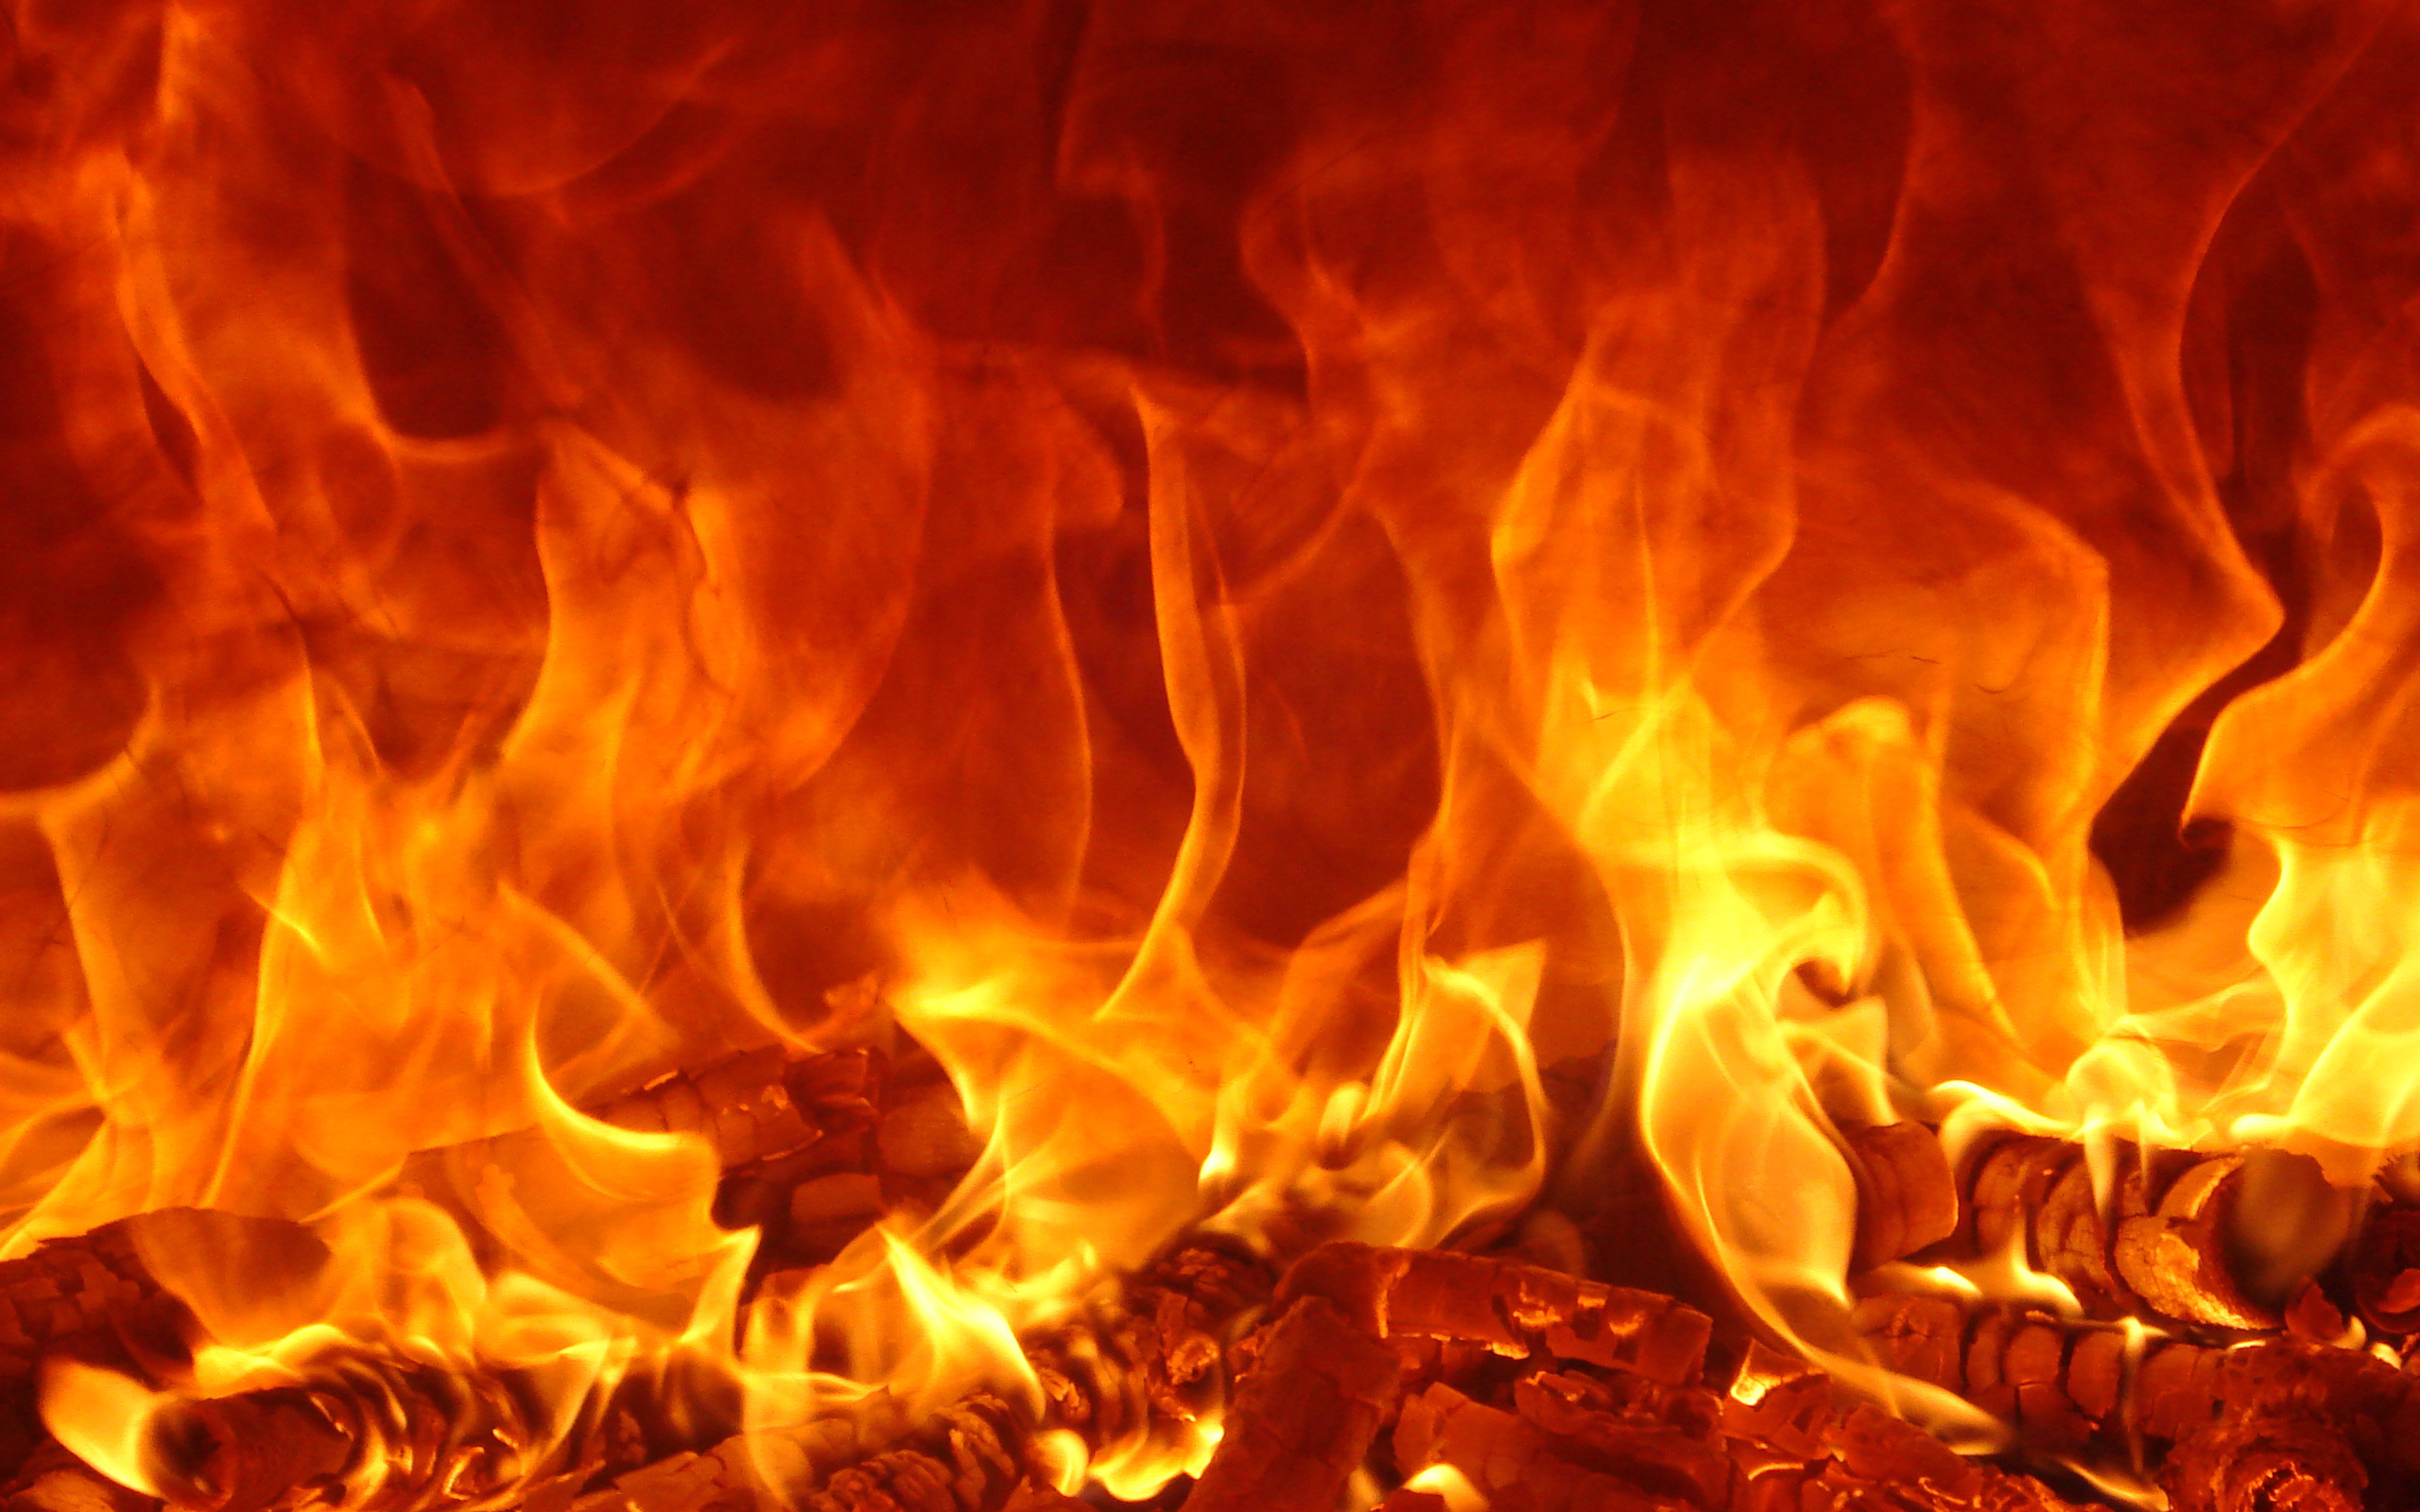 Fire Backgrounds for Desktop Wallpapers, Backgrounds, Images